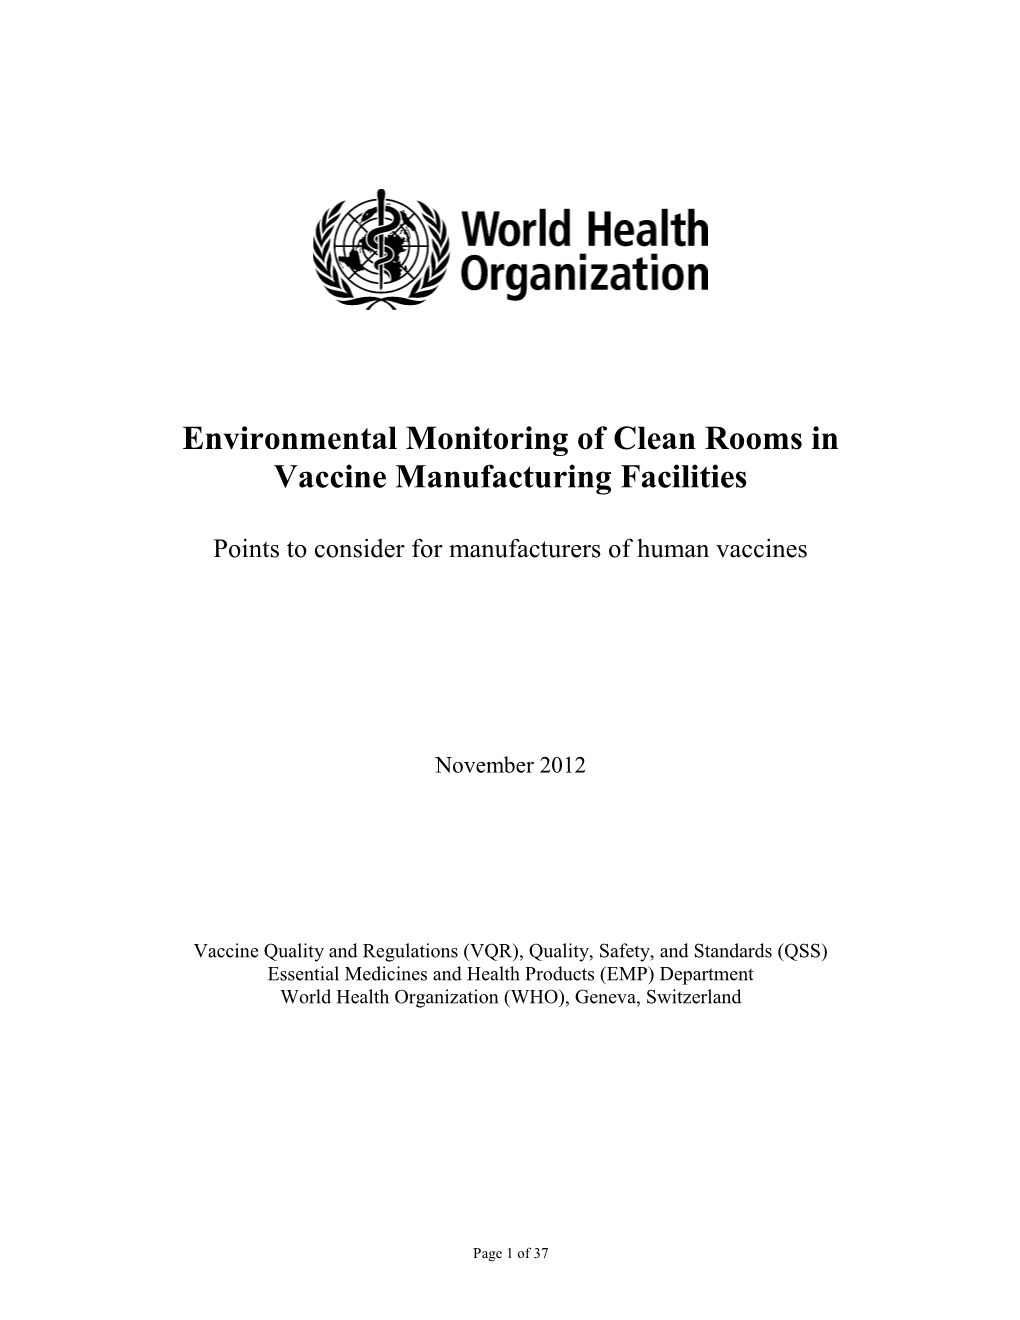 Environmental Monitoring of Clean Rooms in Vaccine Manufacturing Facilities